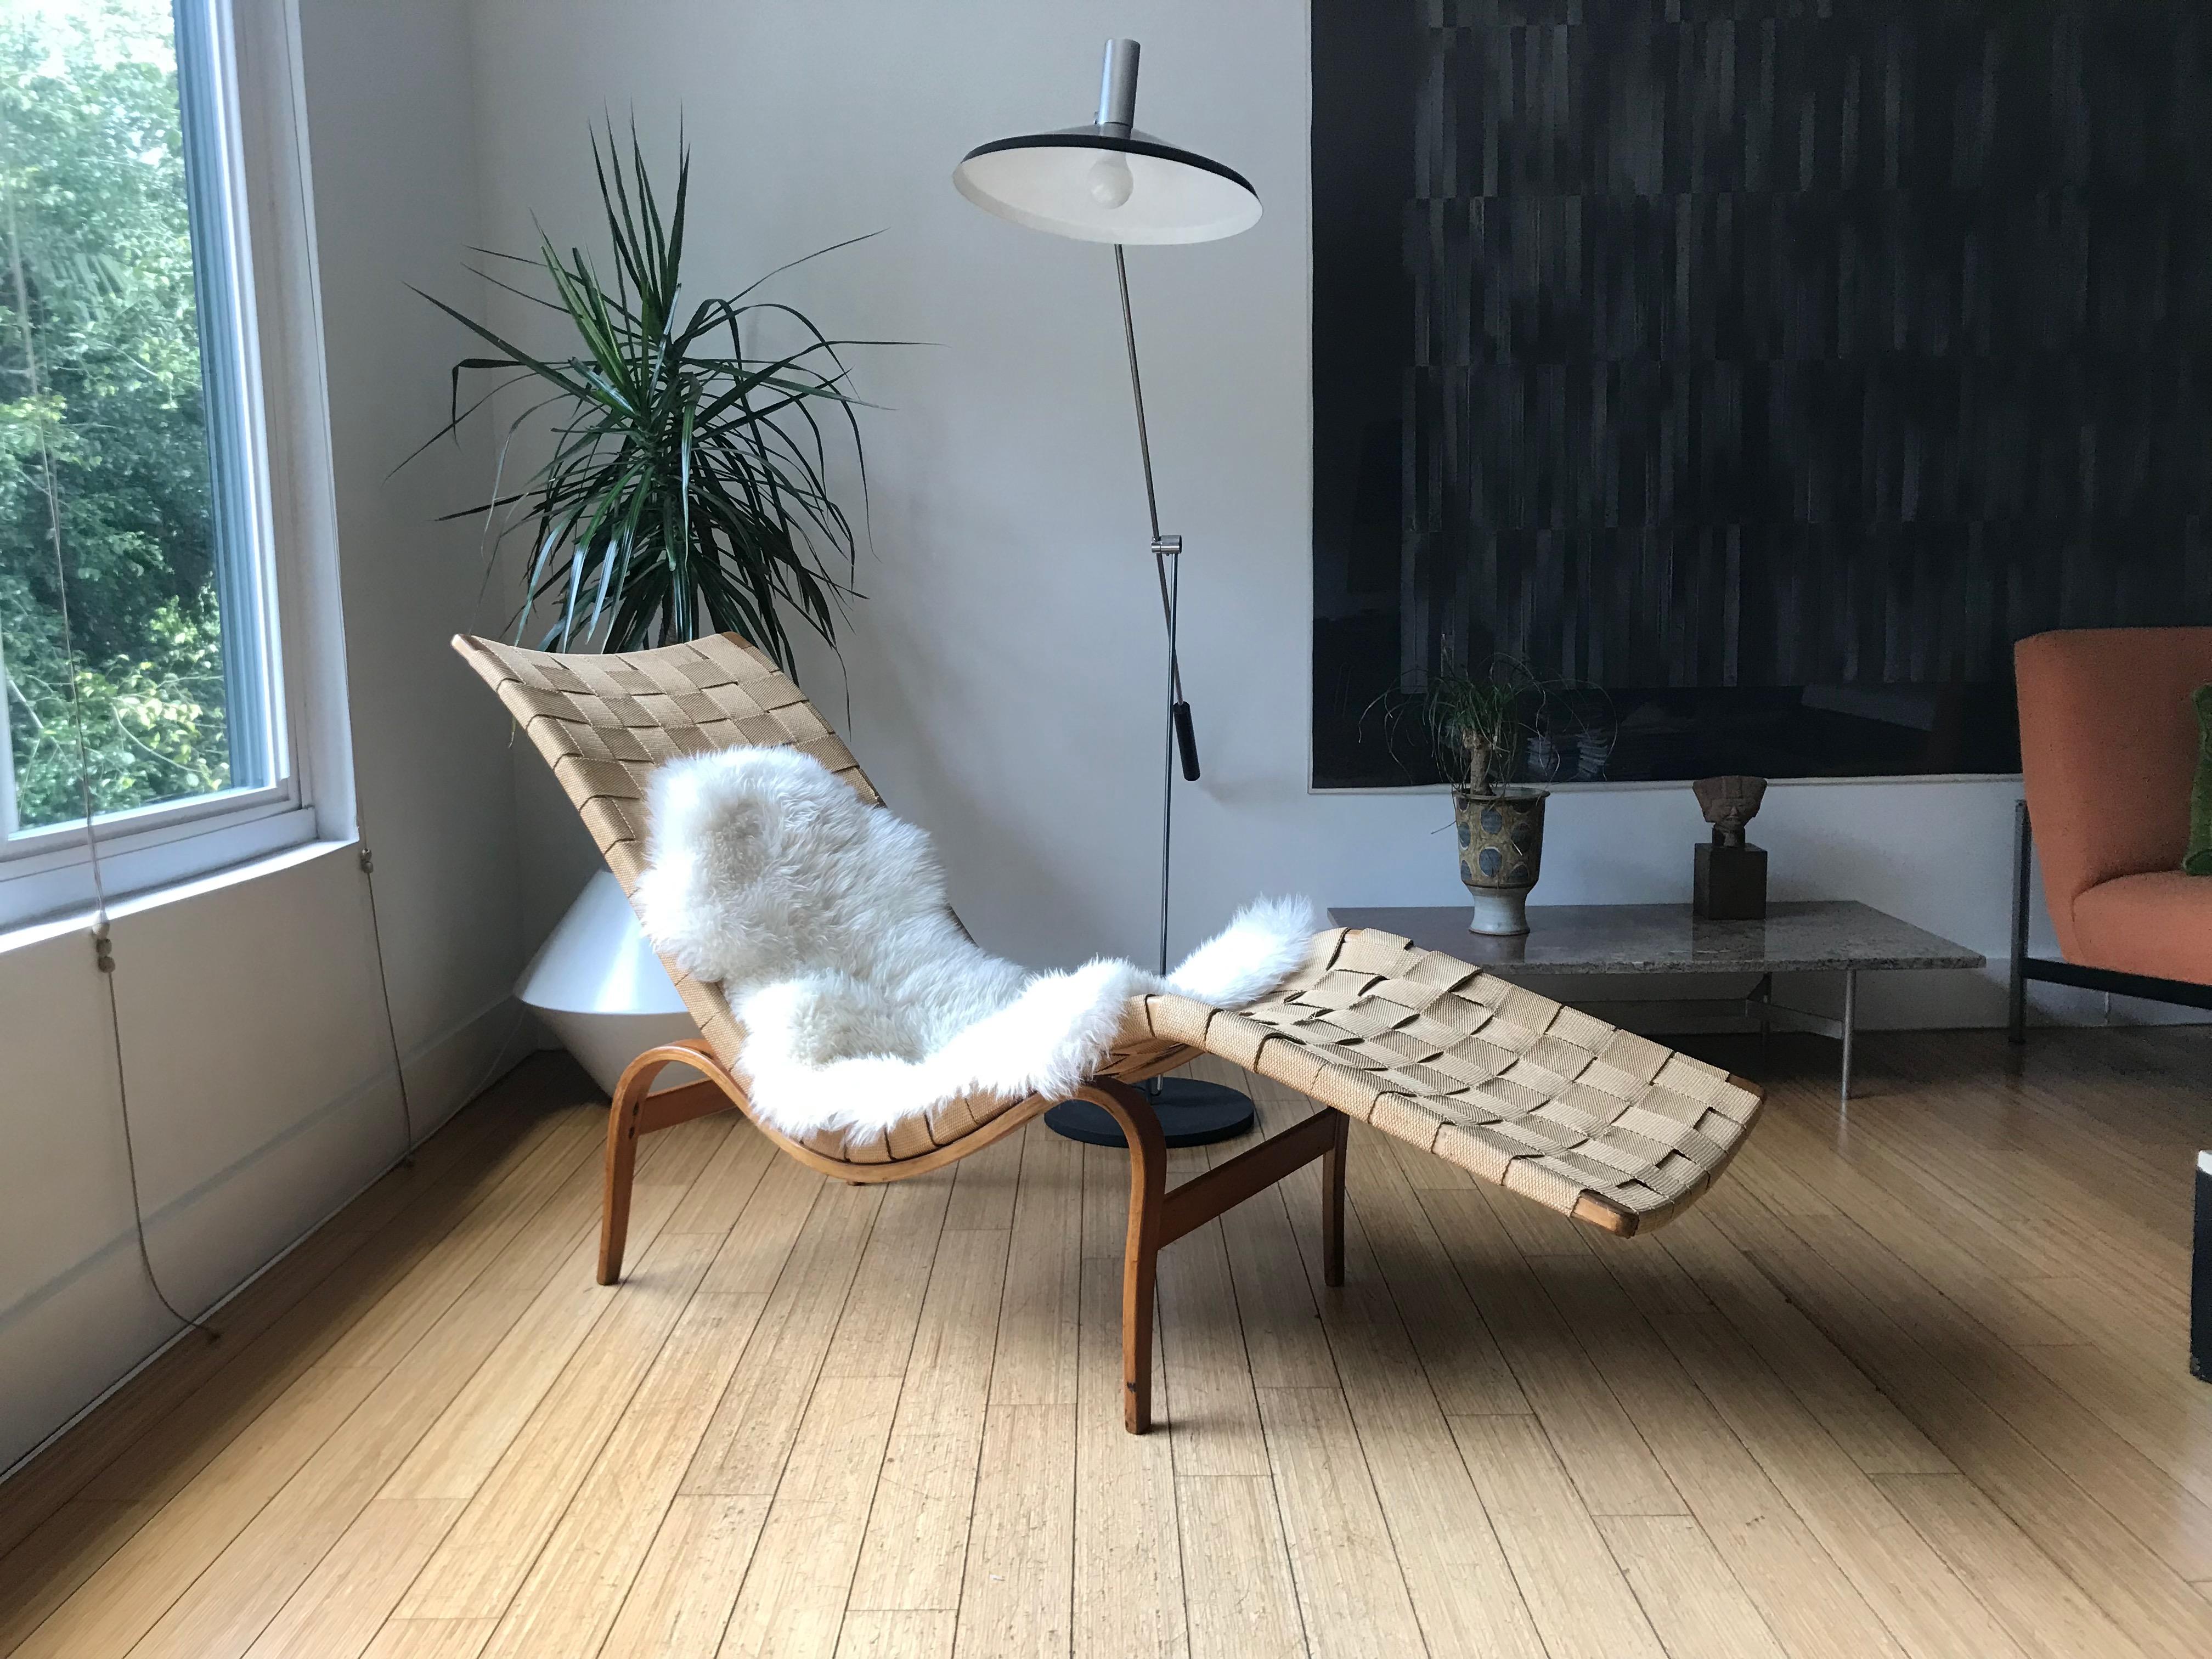 Classic modernist design.
Bent birch wood with original canvas weave.
Original vintage condition.
No damage or repairs.
It shows wear and patina consistent with age and use.
Still solid, light and sturdy.
Presents well.
This is a historical